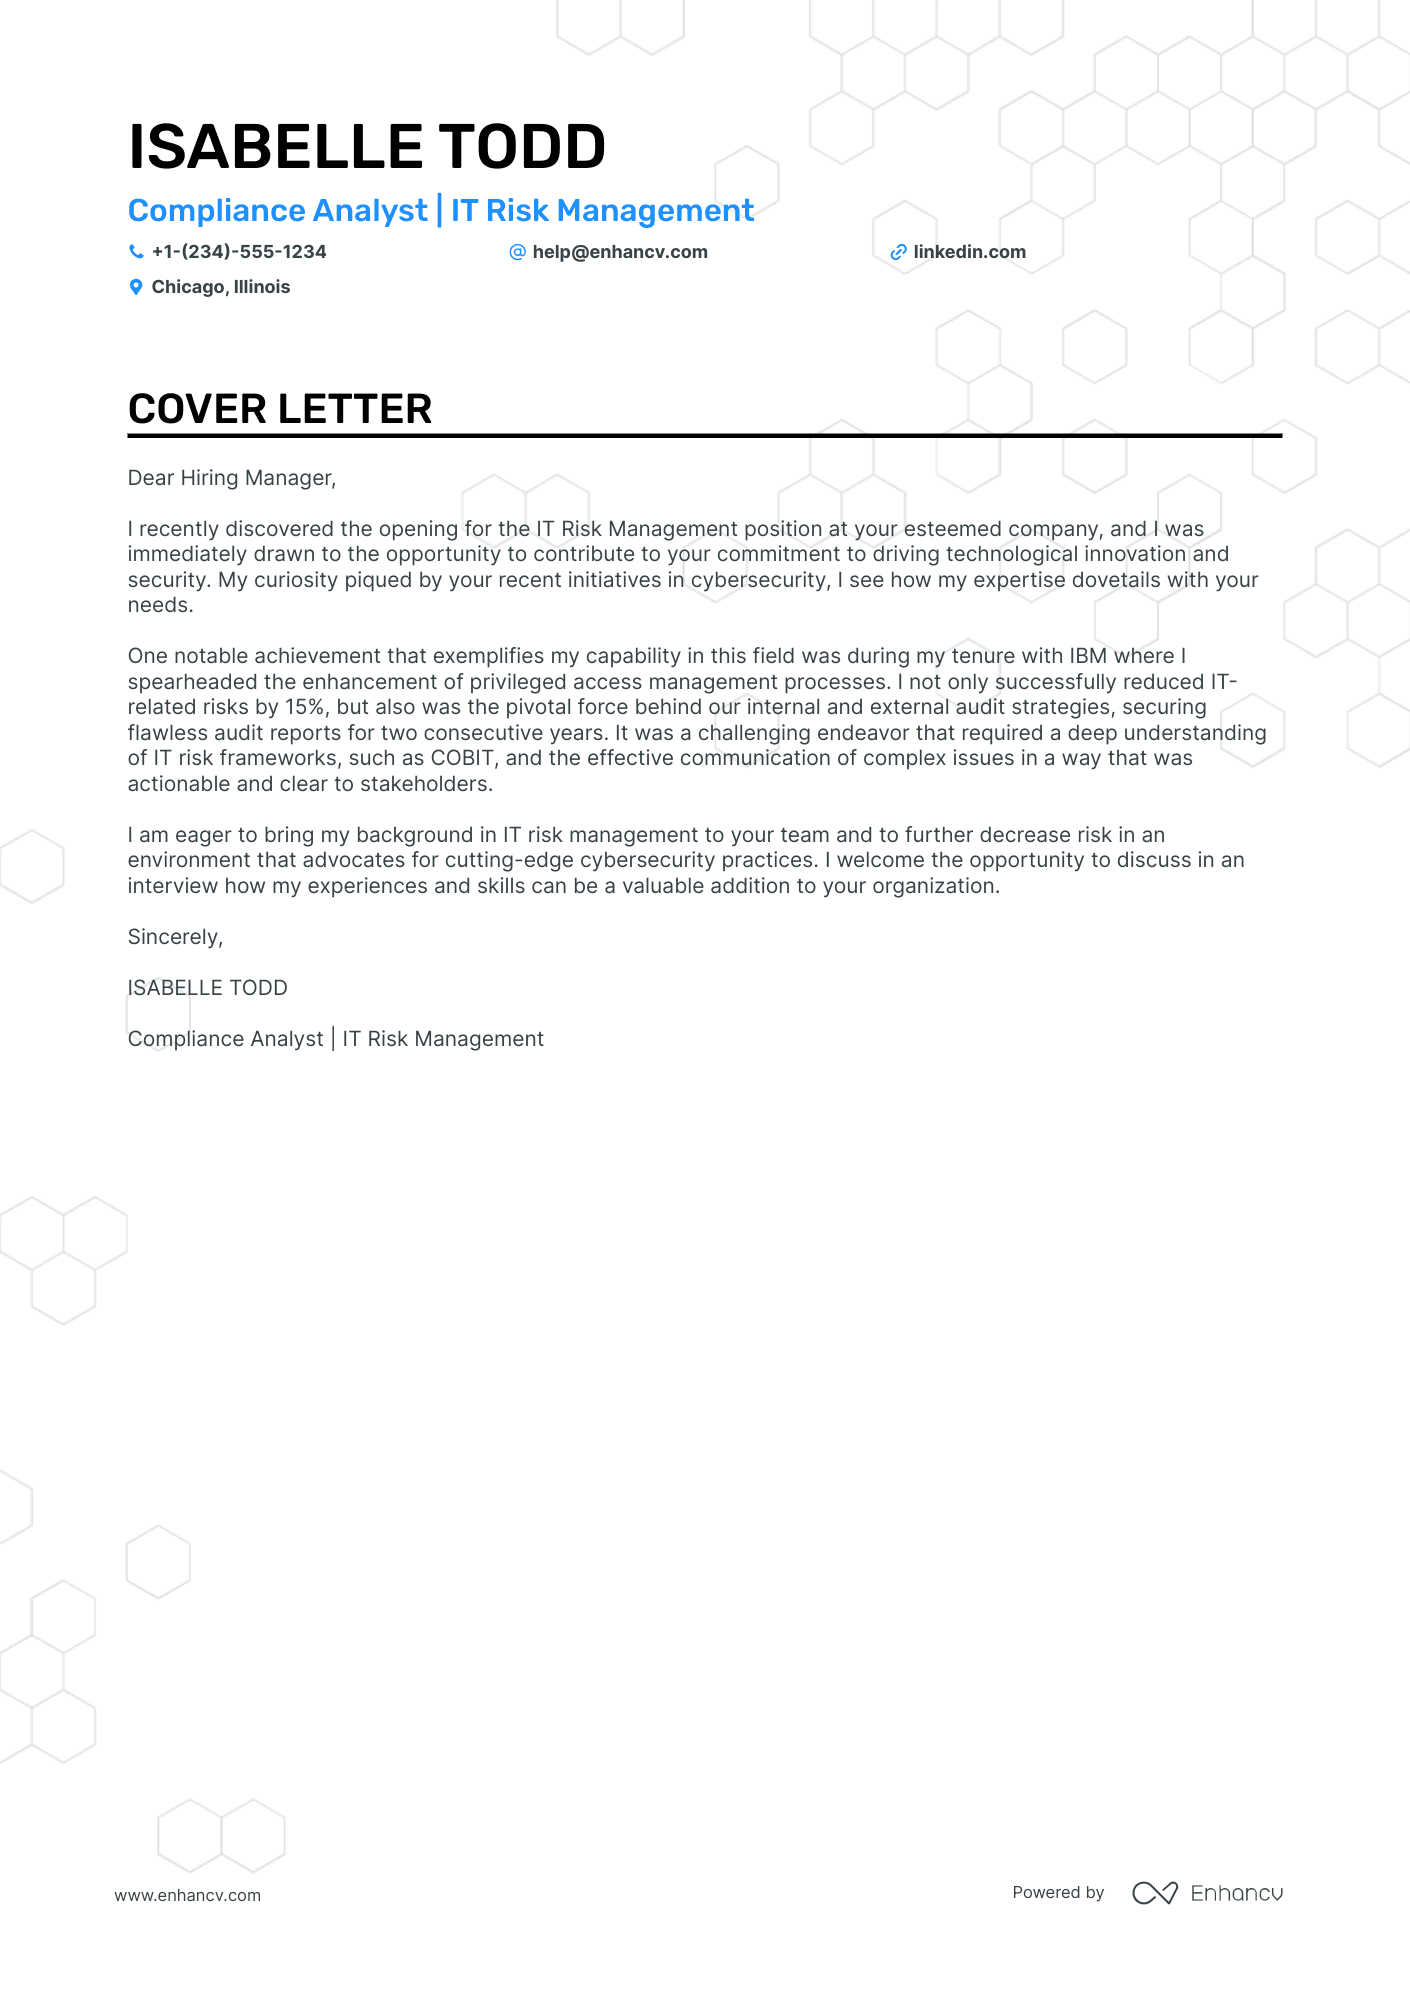 Compliance Analyst cover letter